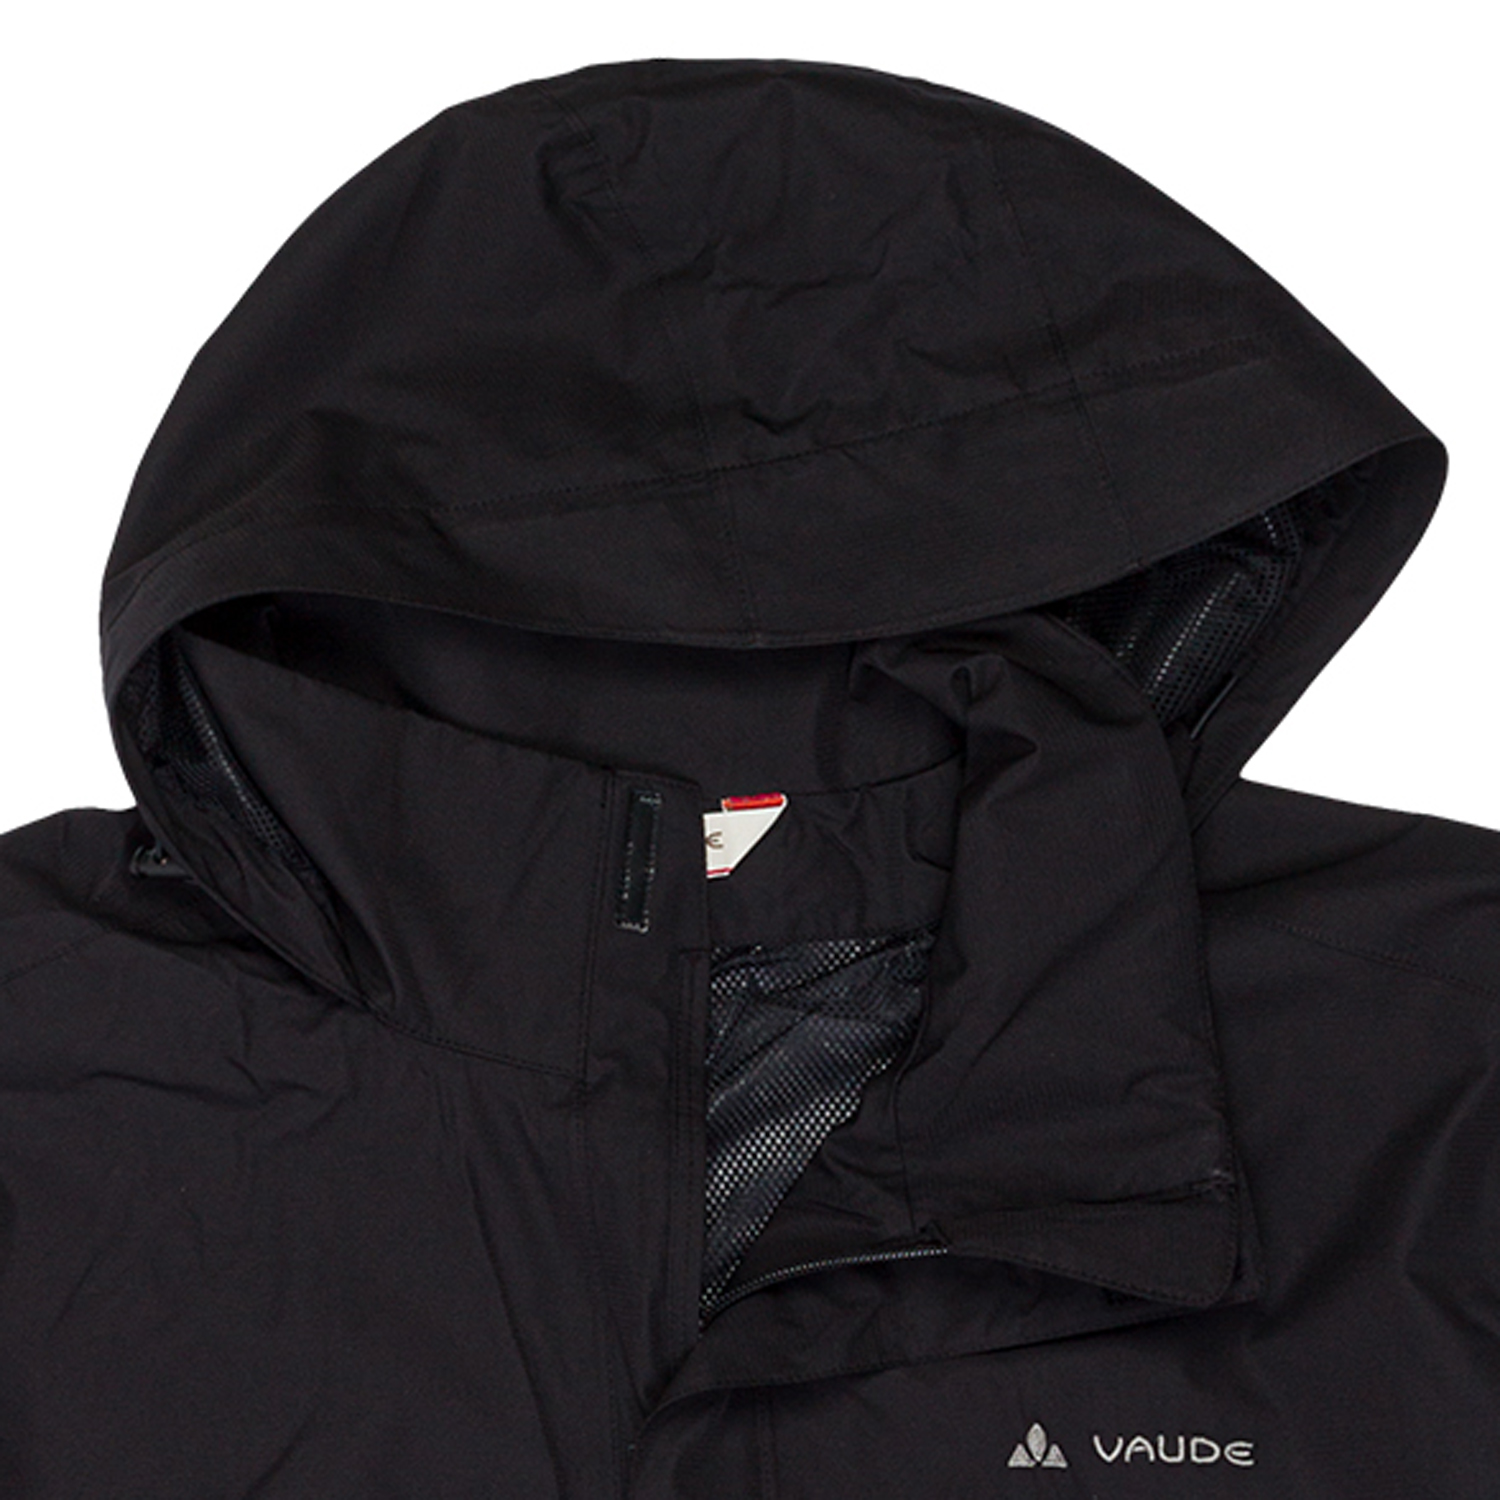 Rain jacket for men in black by Vaude up to oversize 5XL